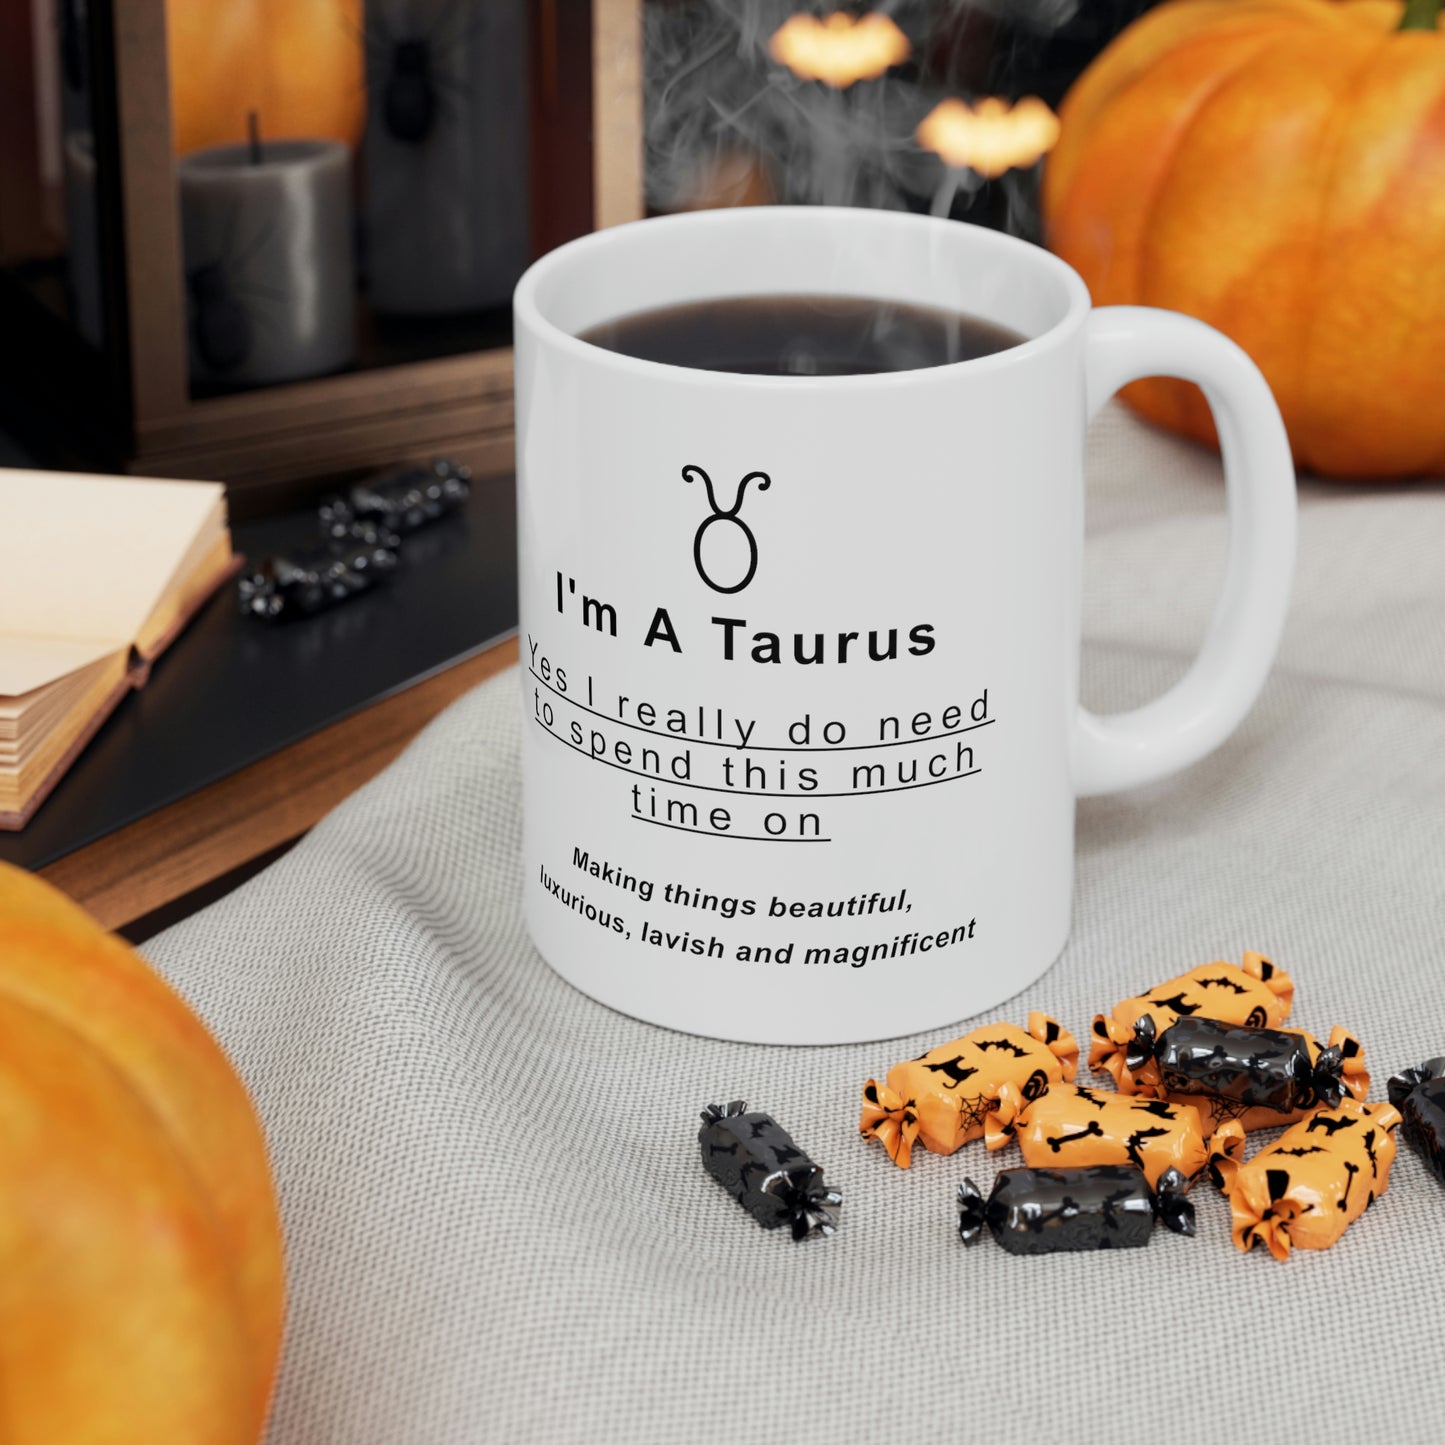 Taurus Mug: "I'm a Taurus - Yes I really do need to spend this much time on..." - full text in description